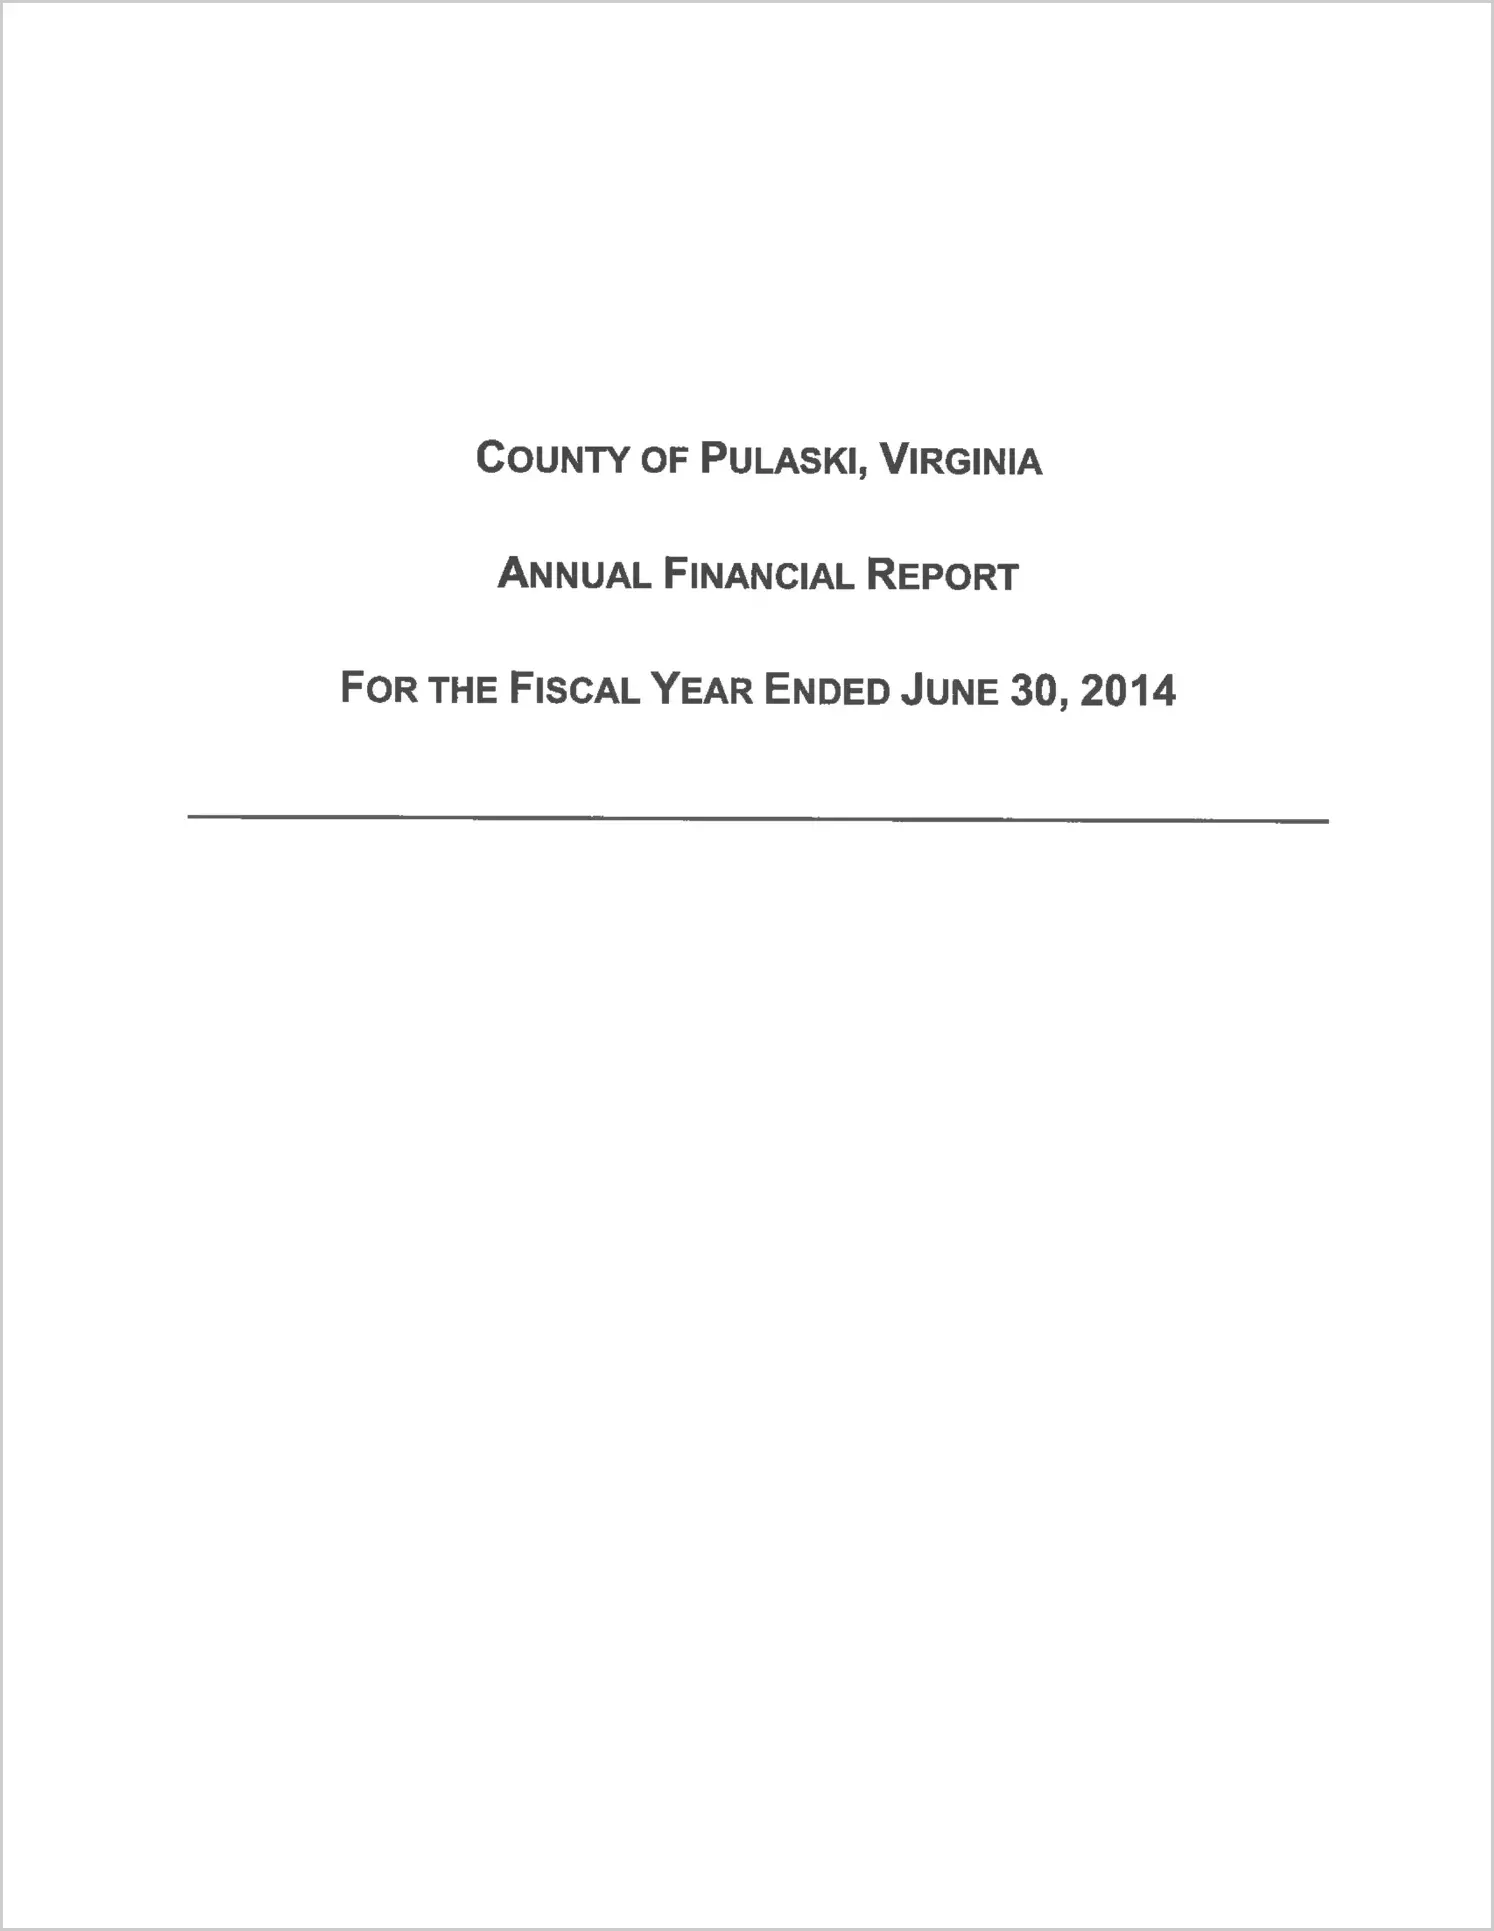 2014 Annual Financial Report for County of Pulaski